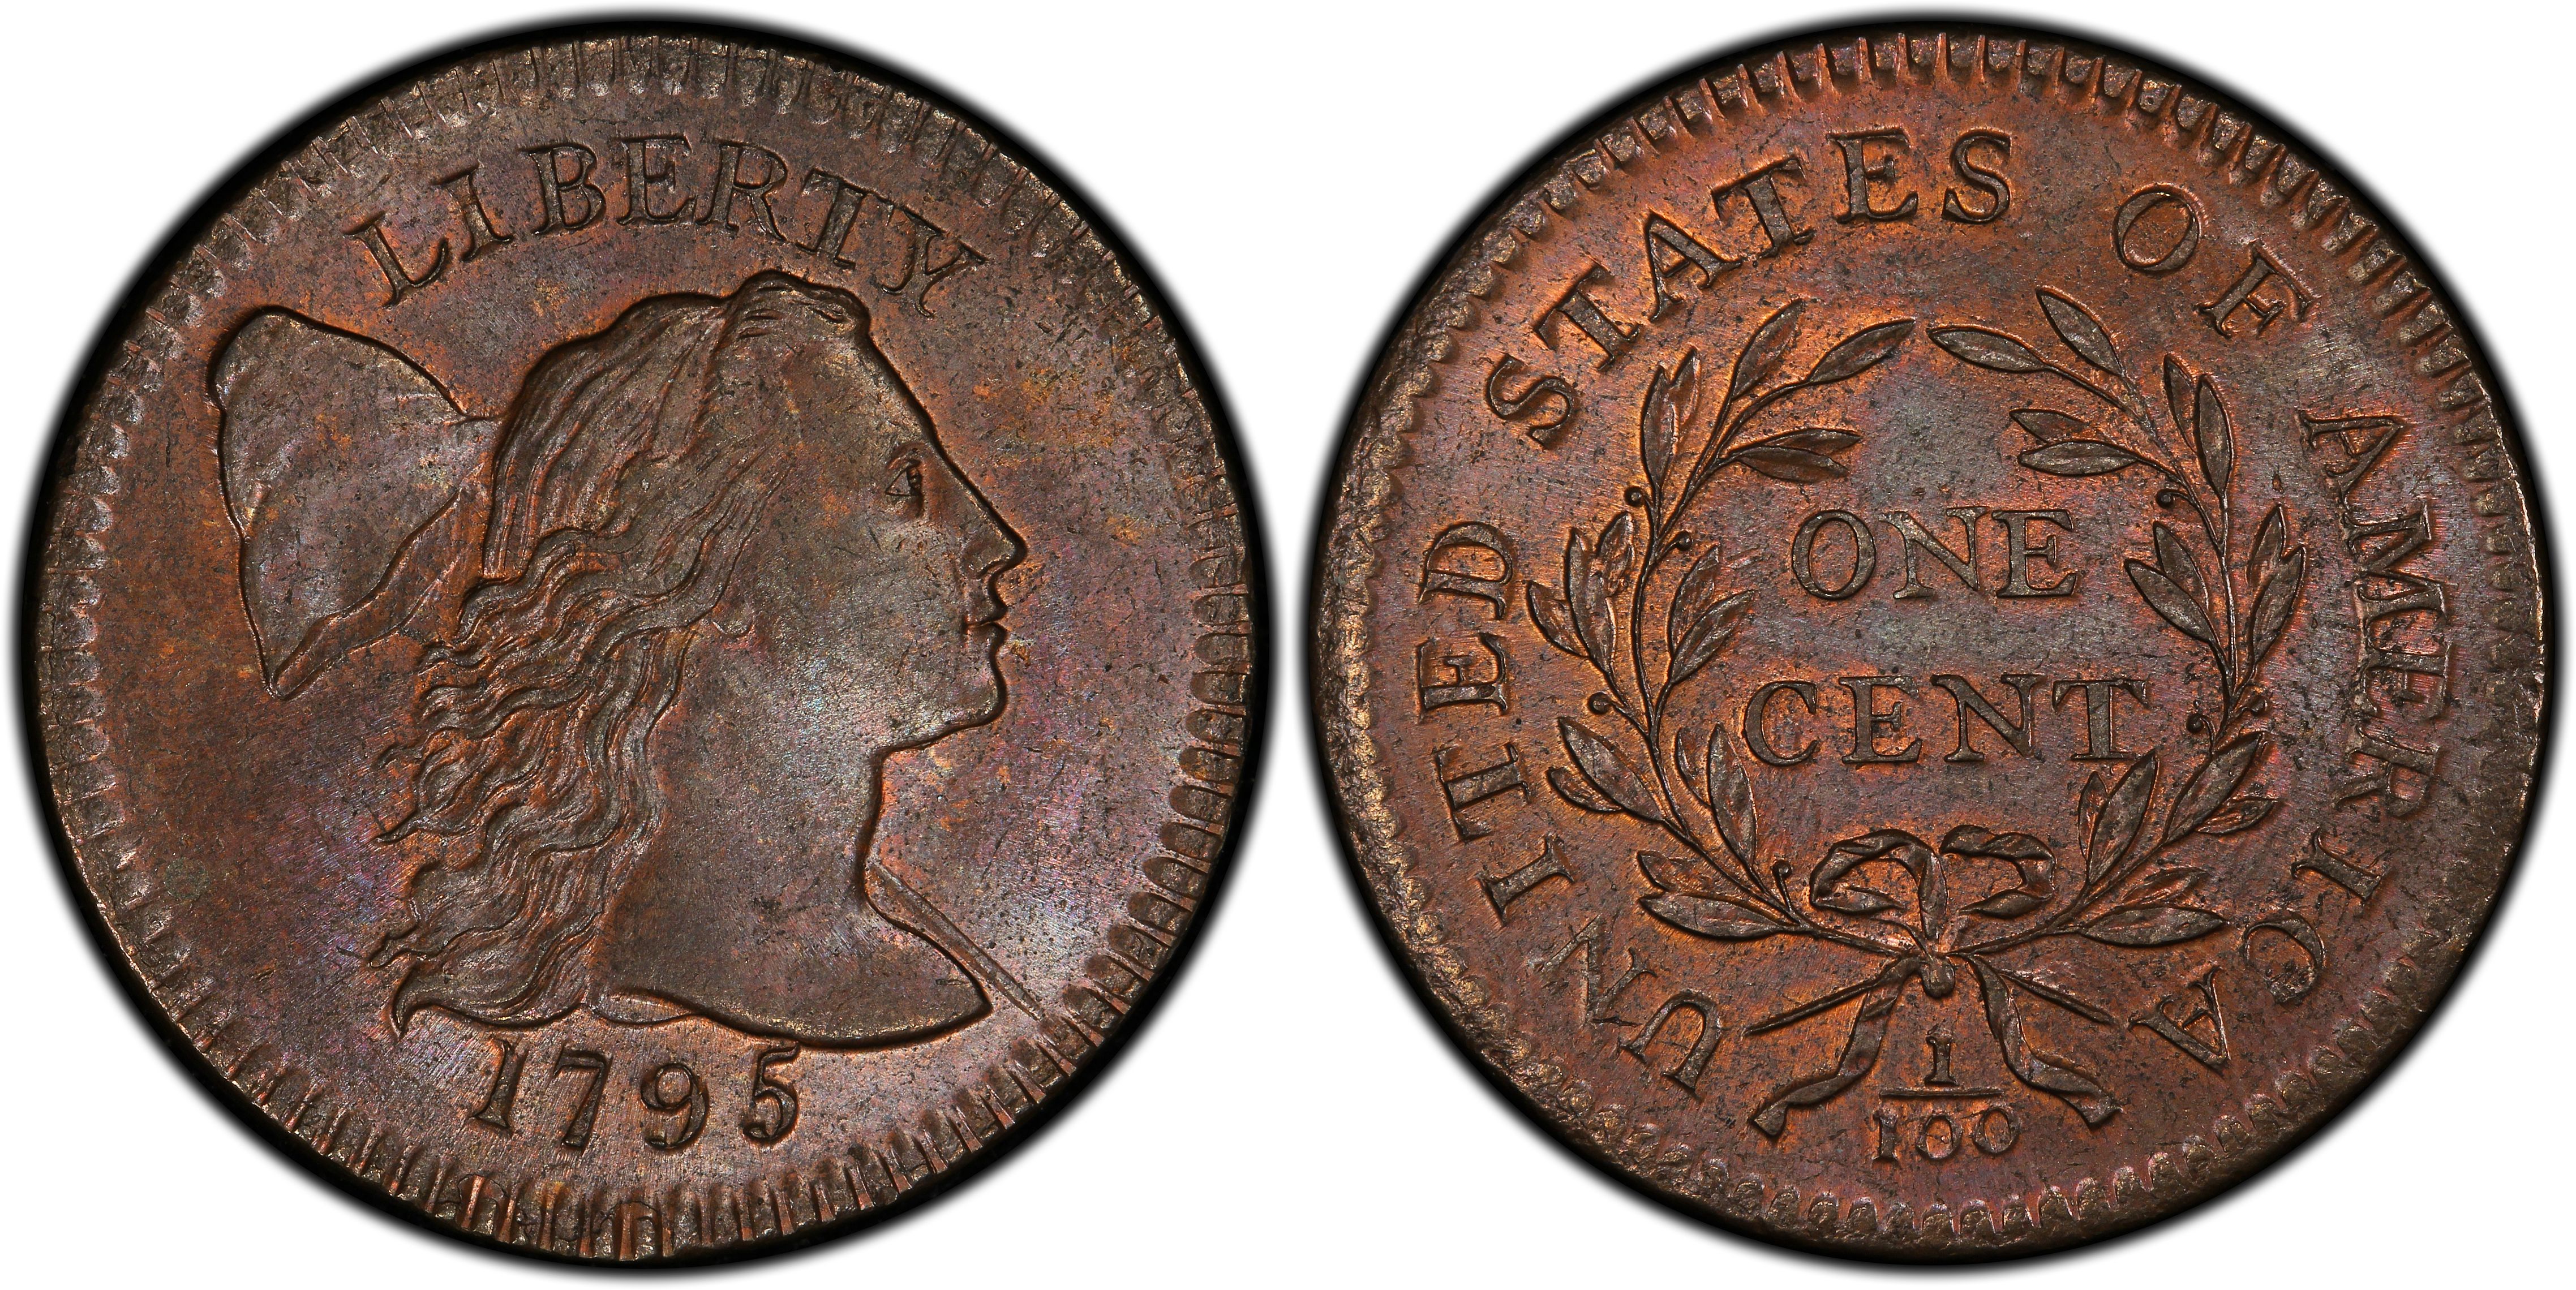 https://images.pcgs.com/CoinFacts/81875234_46957233_2200.jpg